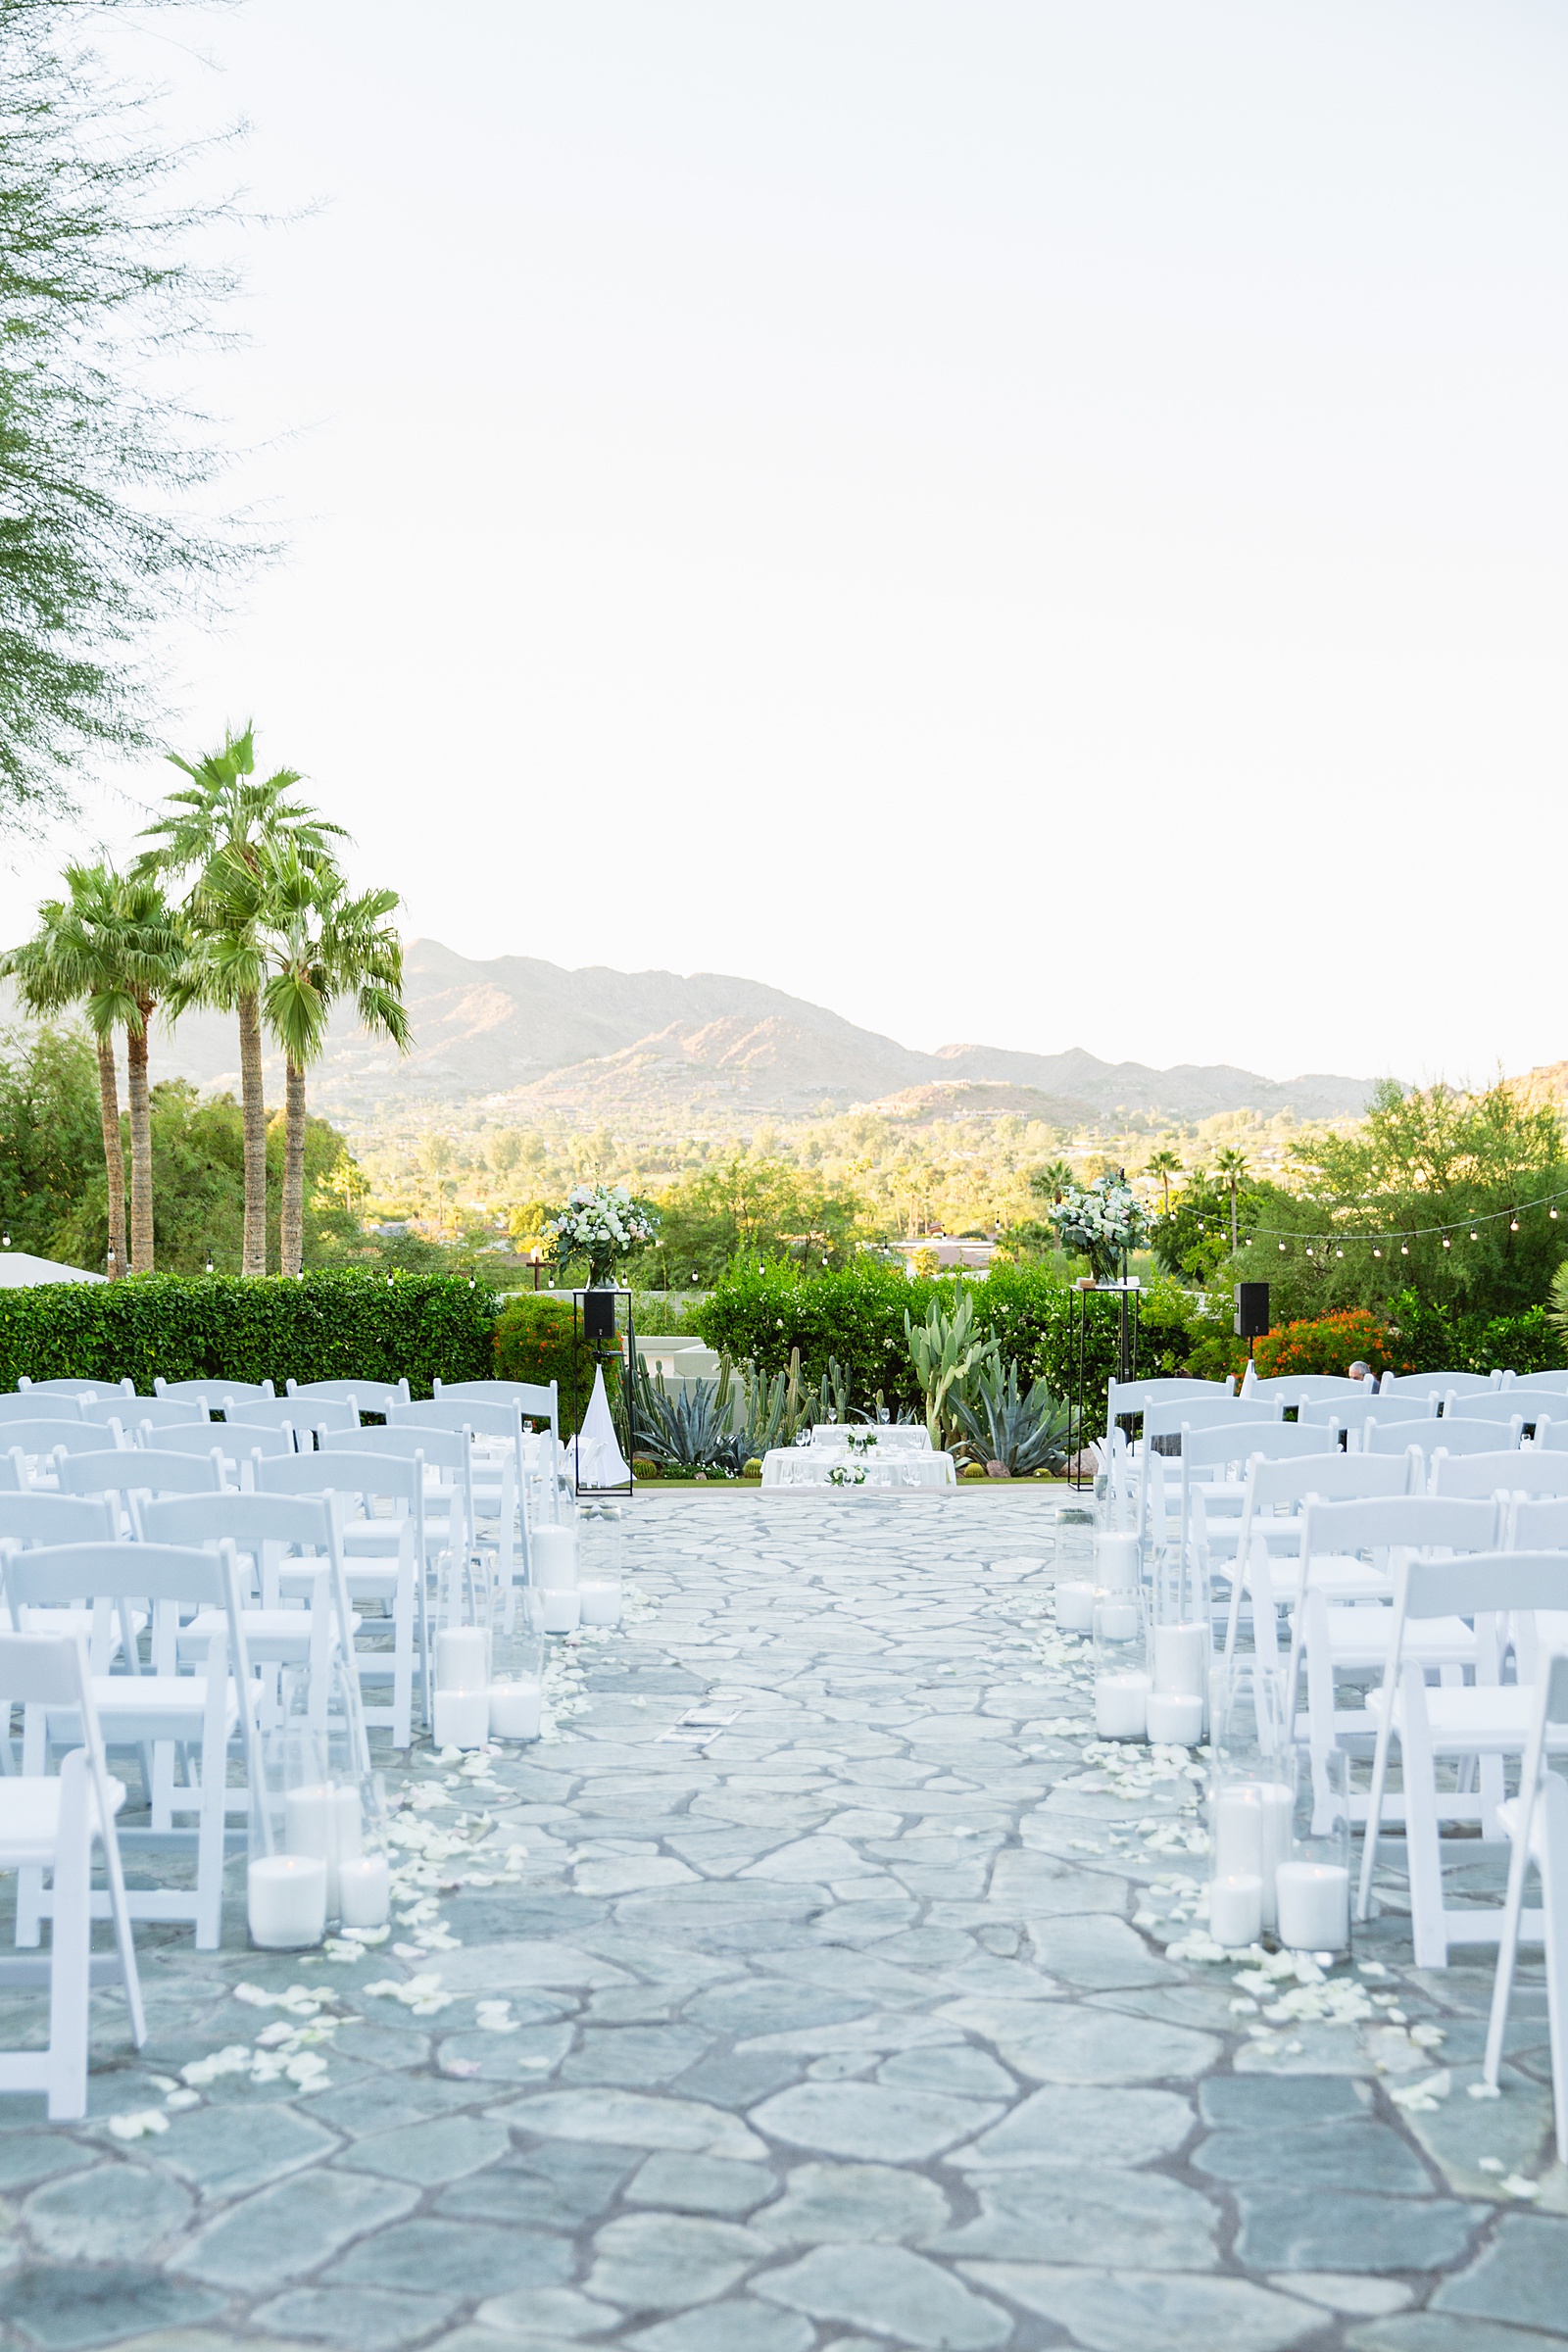 Wedding ceremony at Sanctuary at Camelback by Phoenix wedding photographer Juniper and Co Photography.